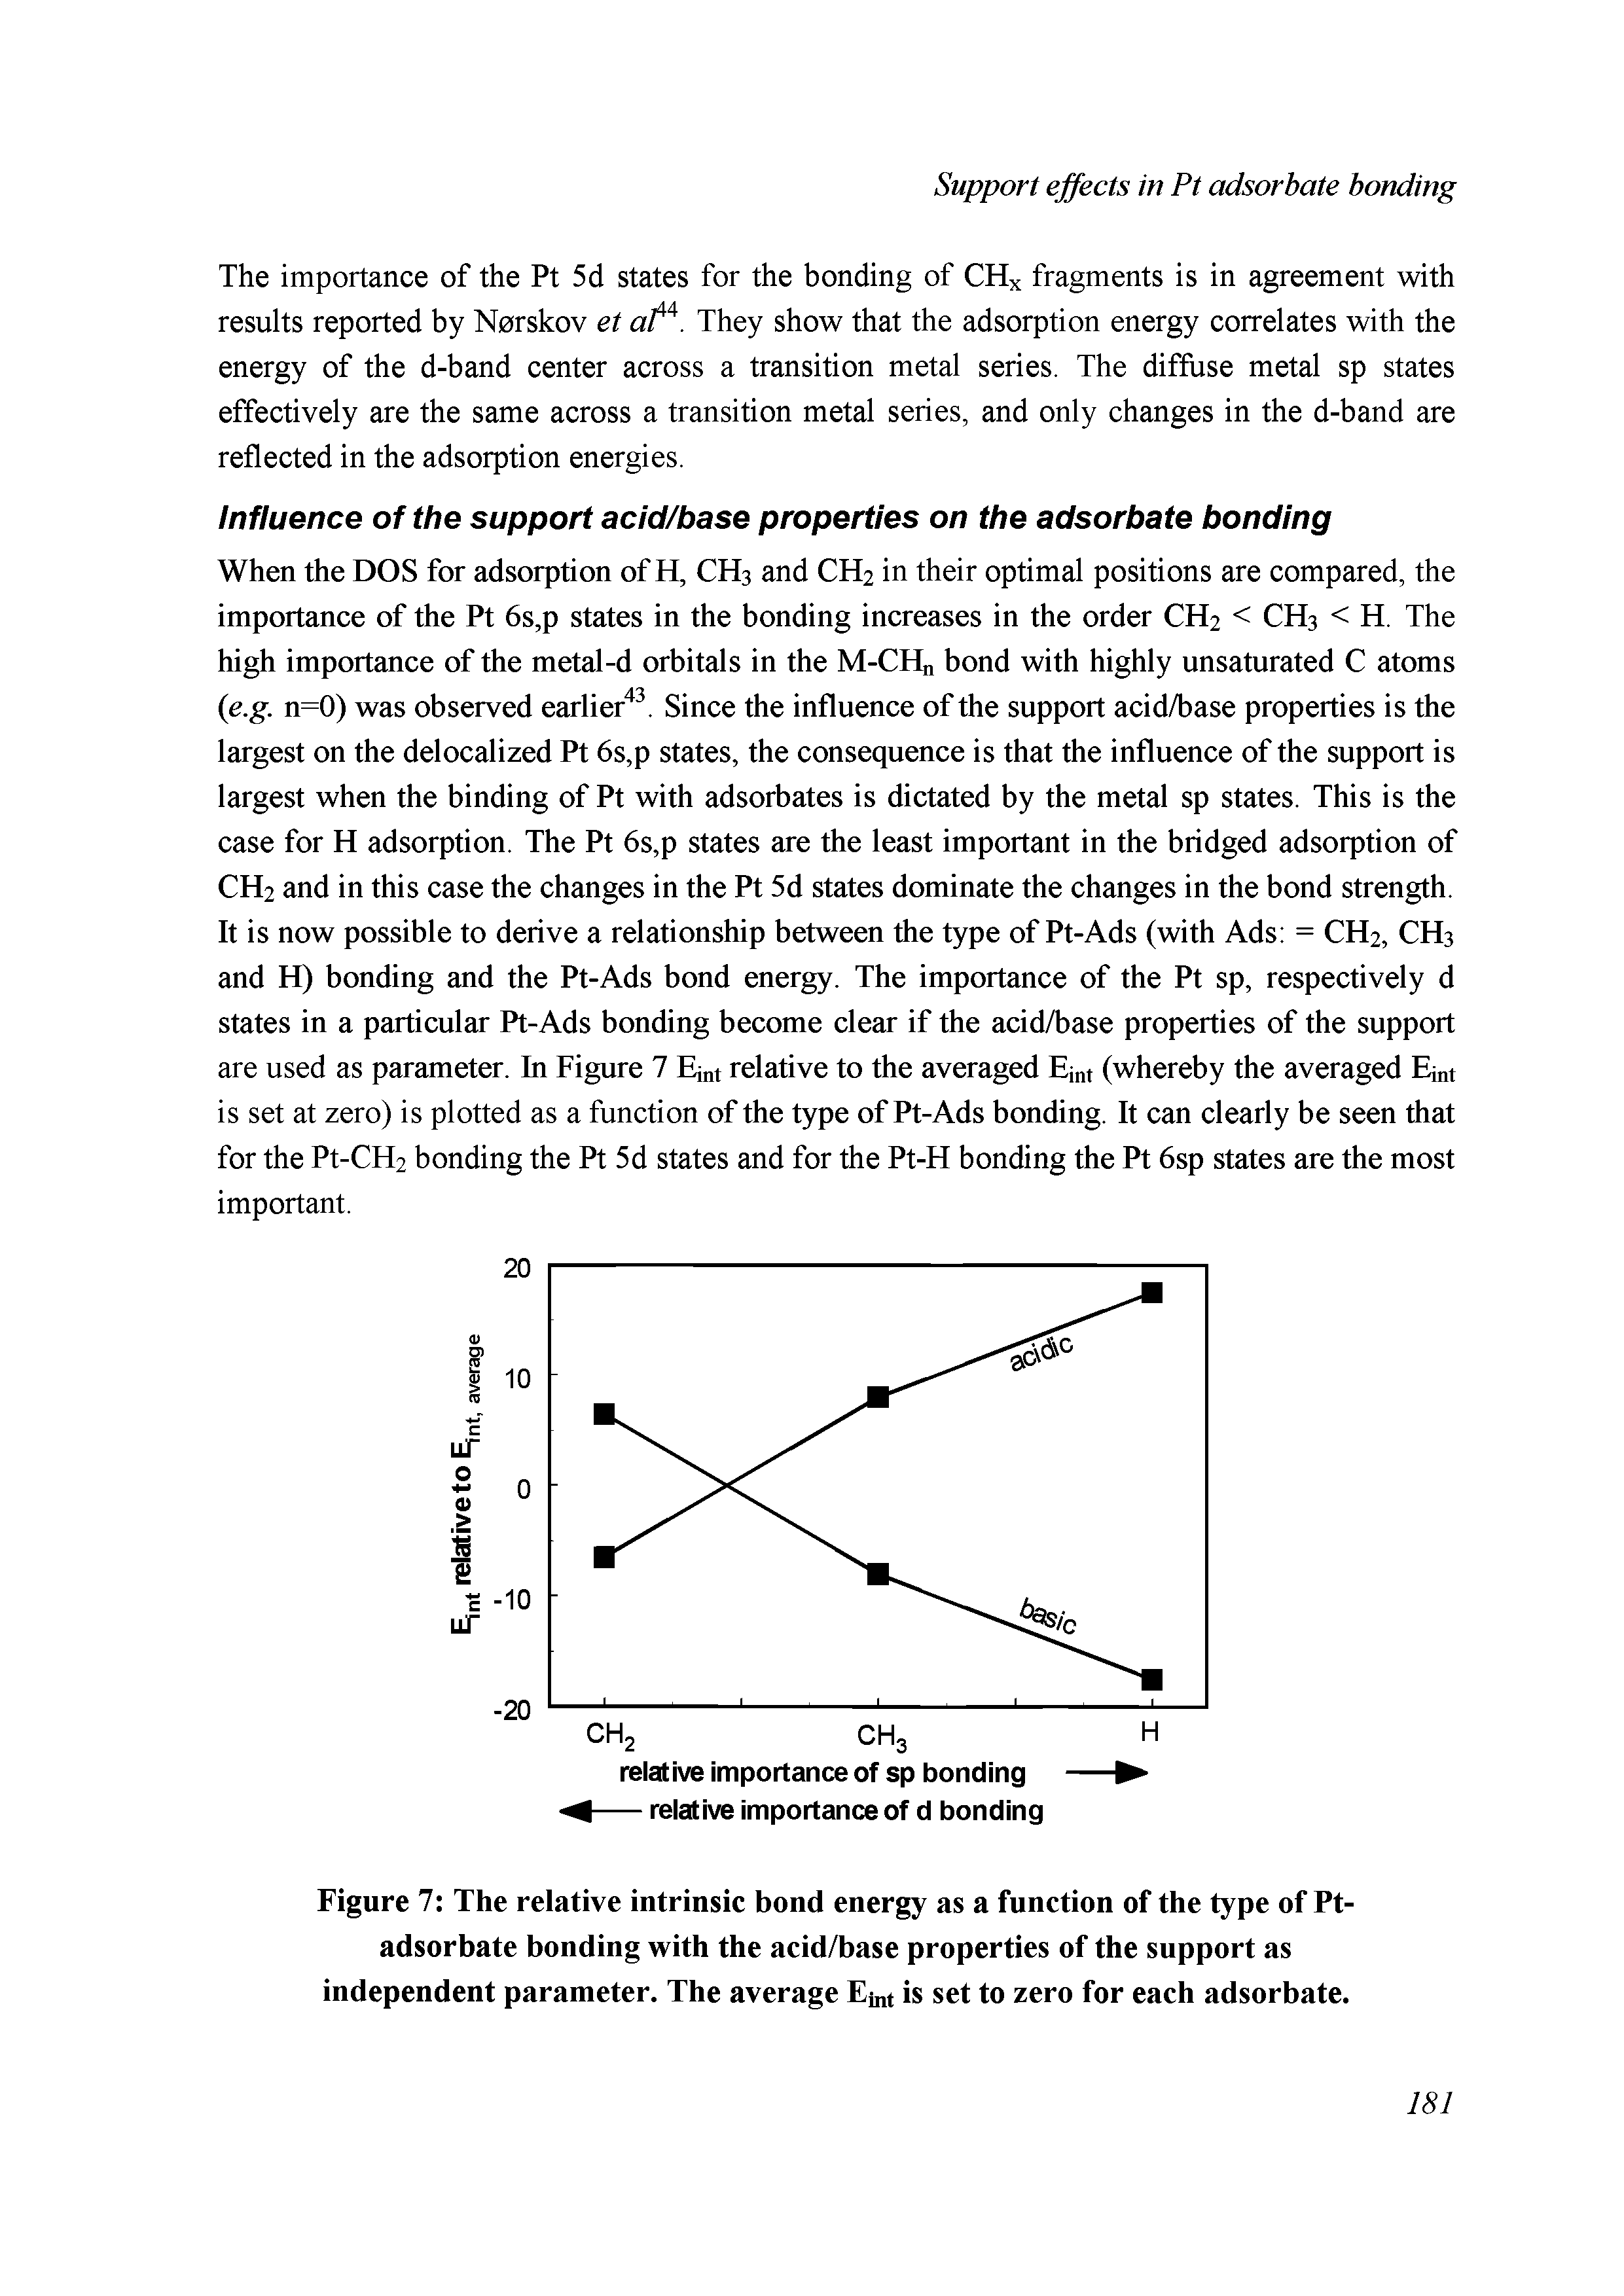 Figure 7 The relative intrinsic bond energy as a function of the type of Pt-adsorbate bonding with the acid/base properties of the support as independent parameter. The average E t is set to zero for each adsorbate.